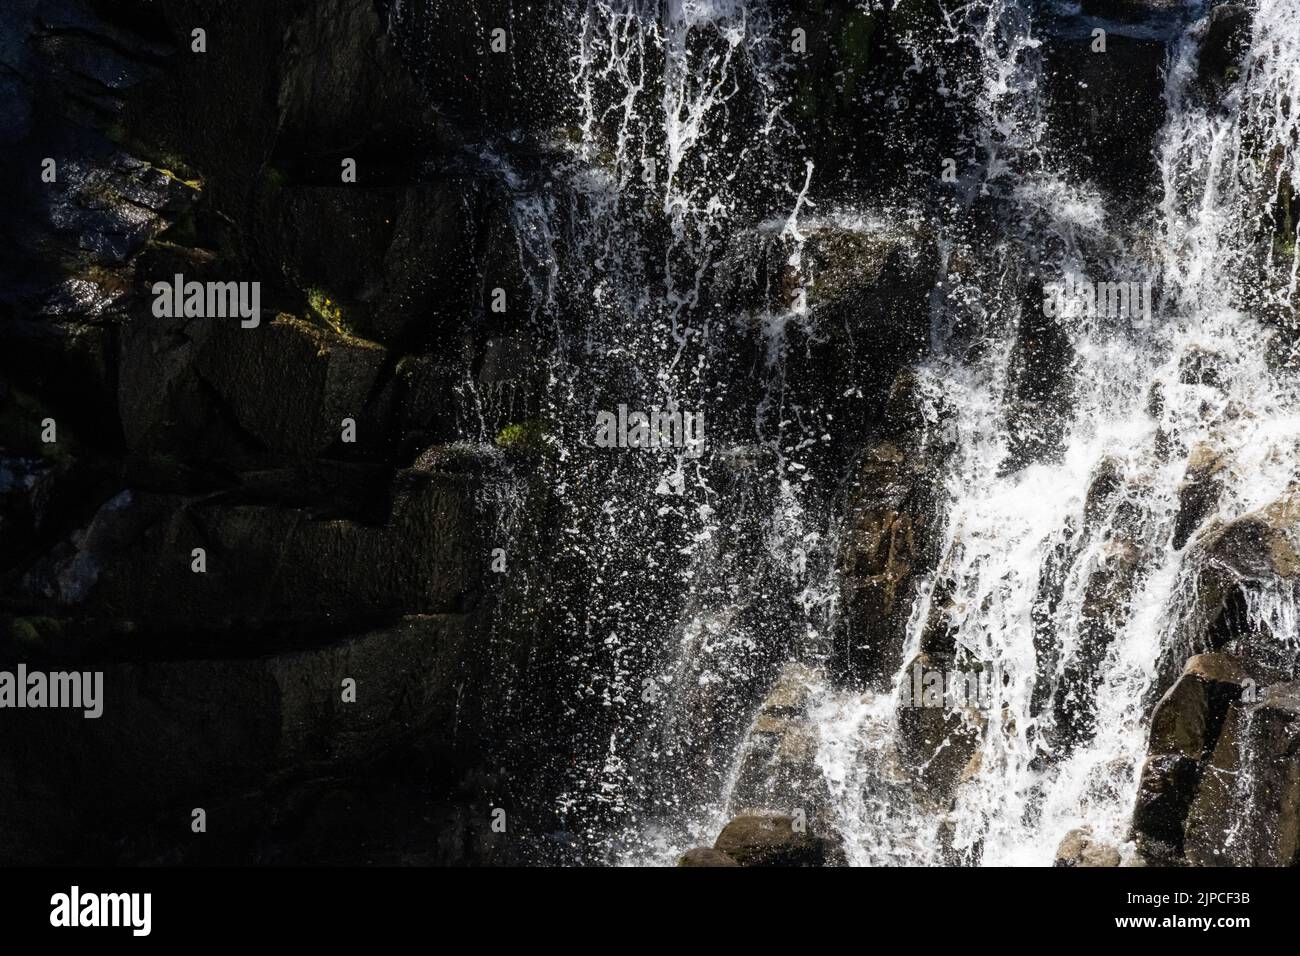 The close-up view of waterfalls flowing through the rocks Stock Photo